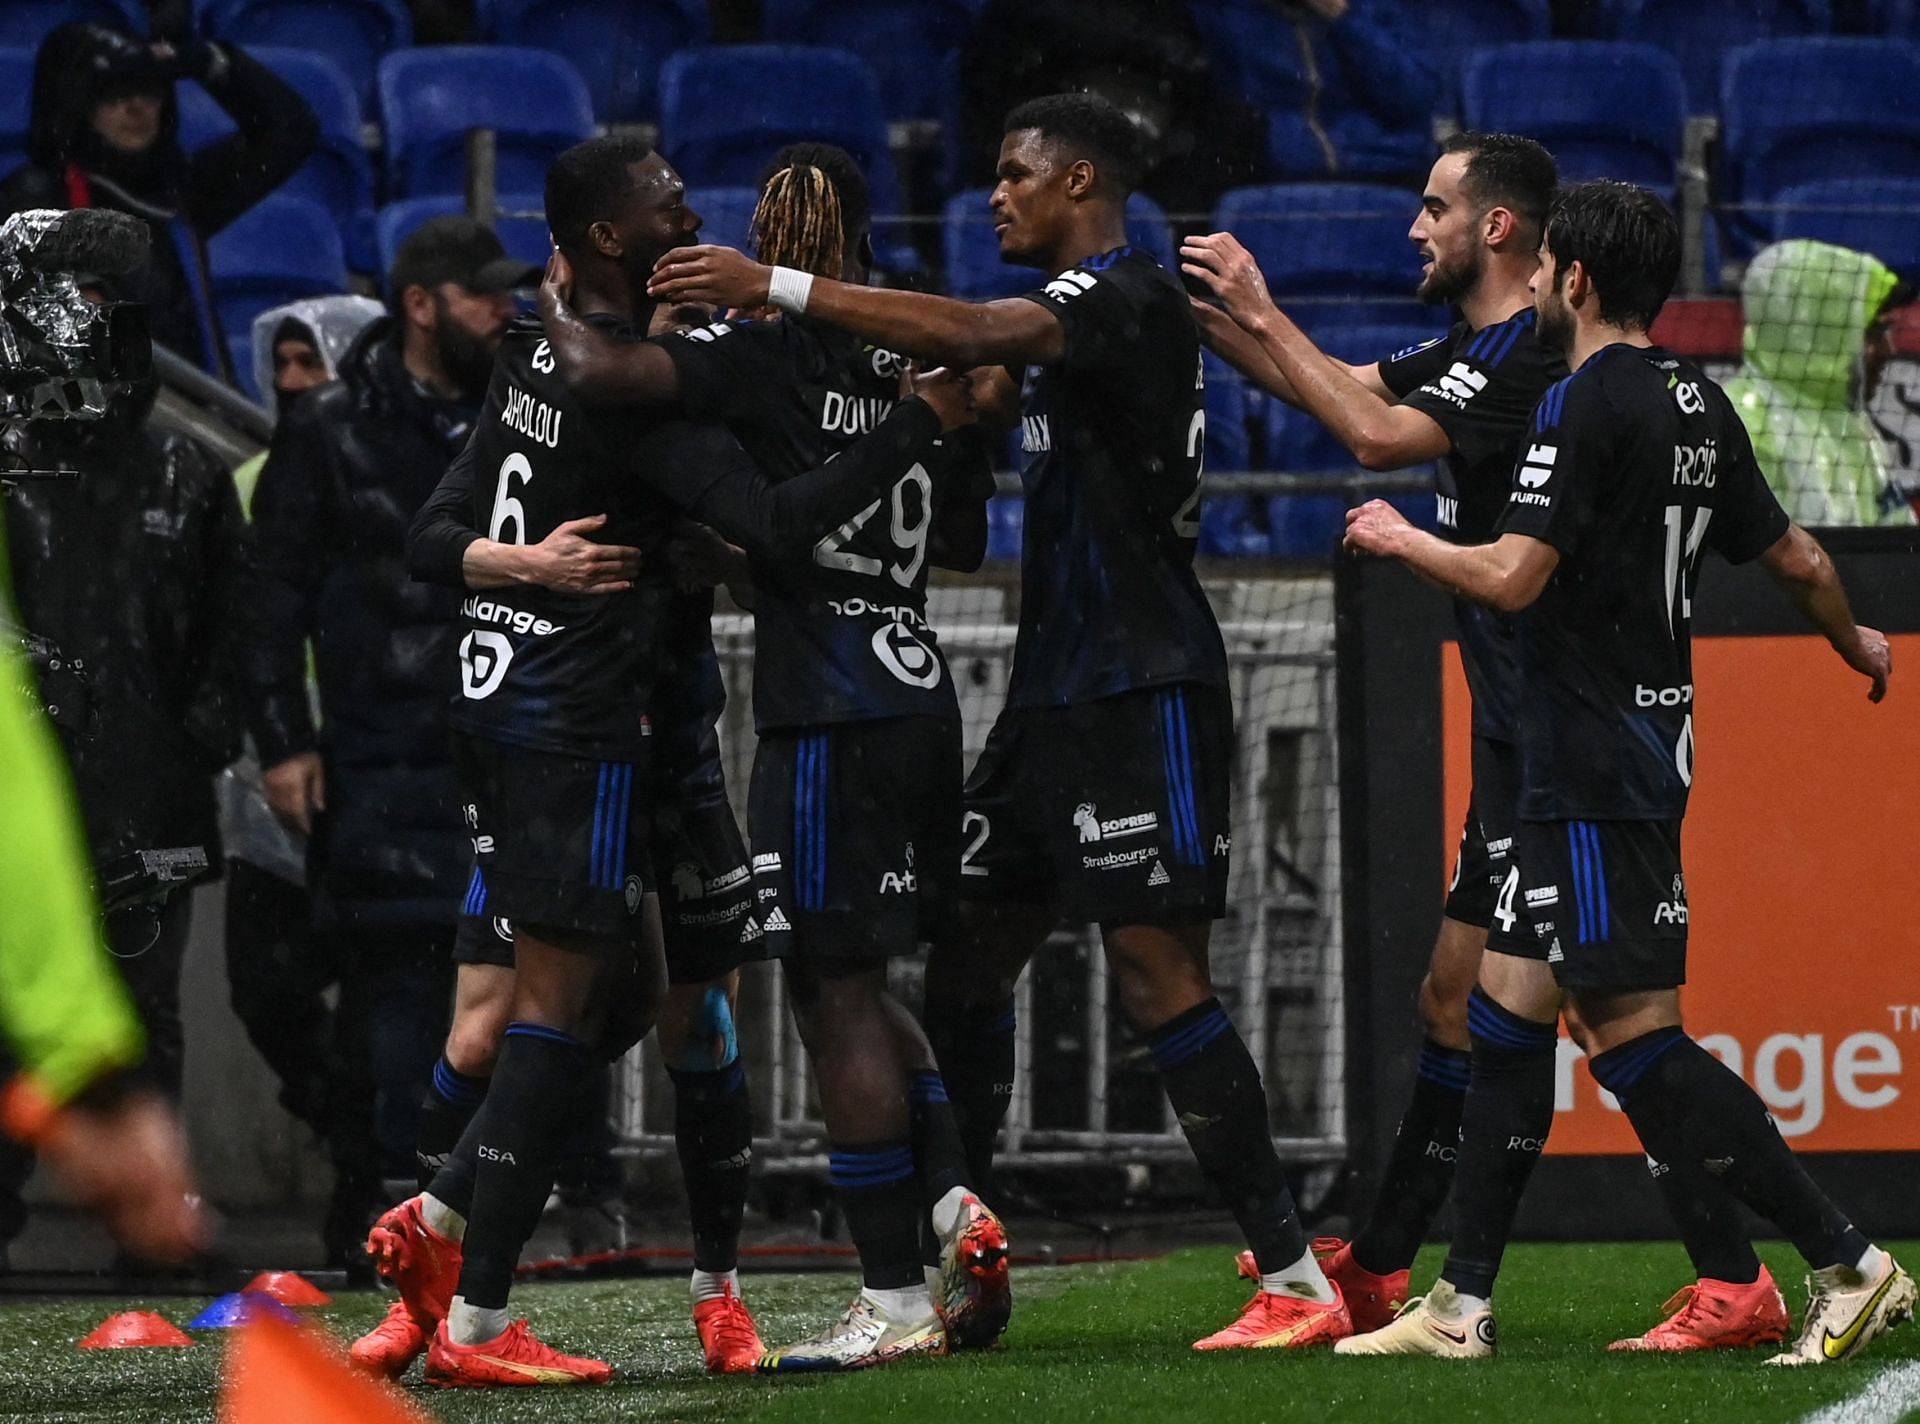 Strasbourg will host Toulouse on Sunday - Ligue 1 